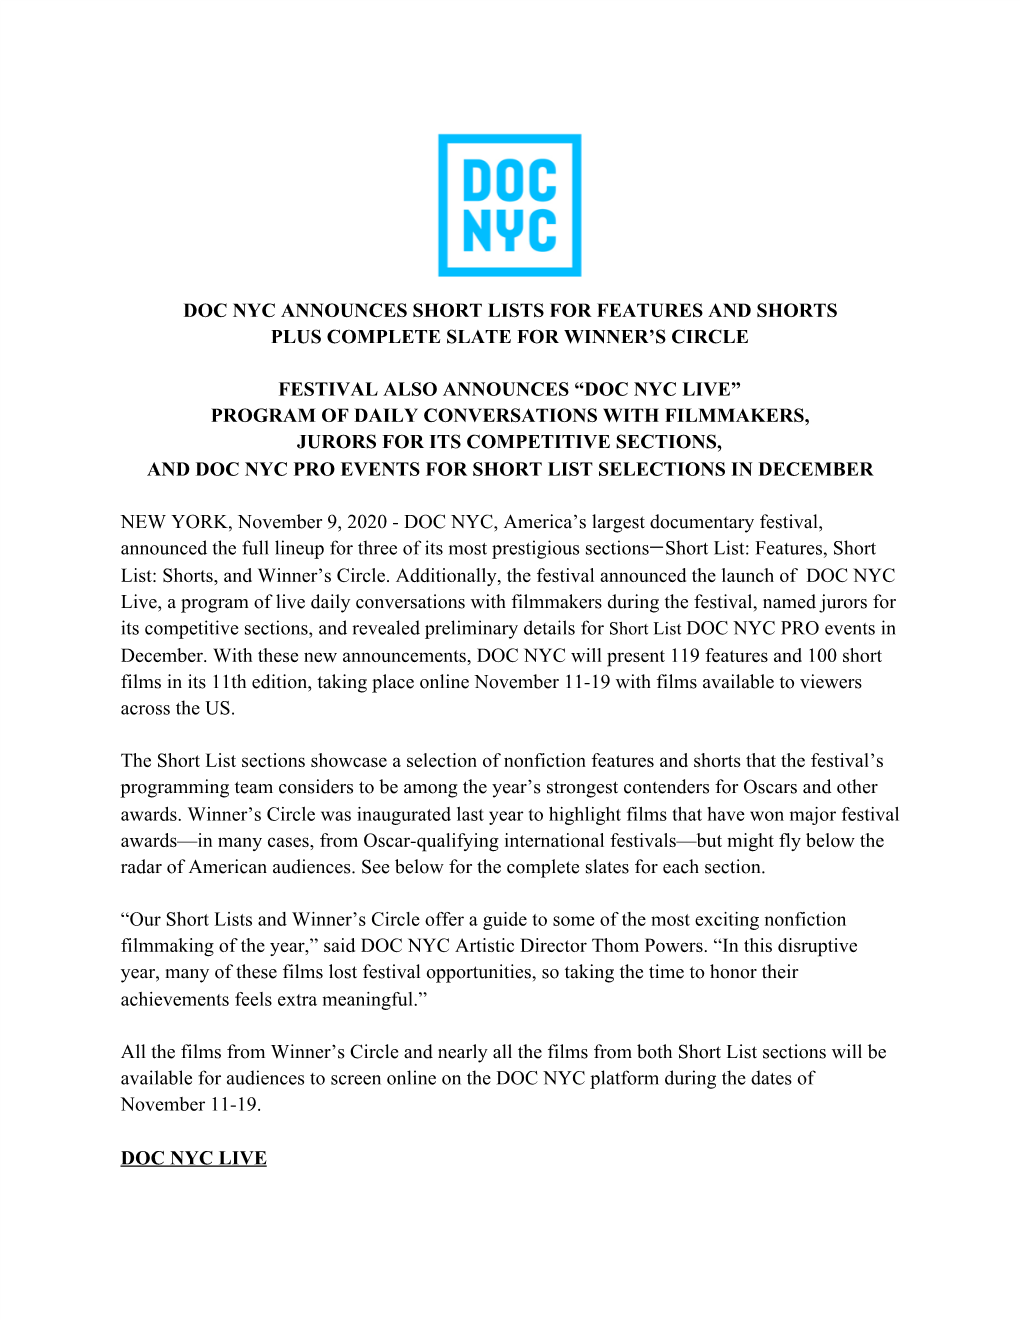 Doc Nyc Announces Short Lists for Features and Shorts Plus Complete Slate for Winner’S Circle